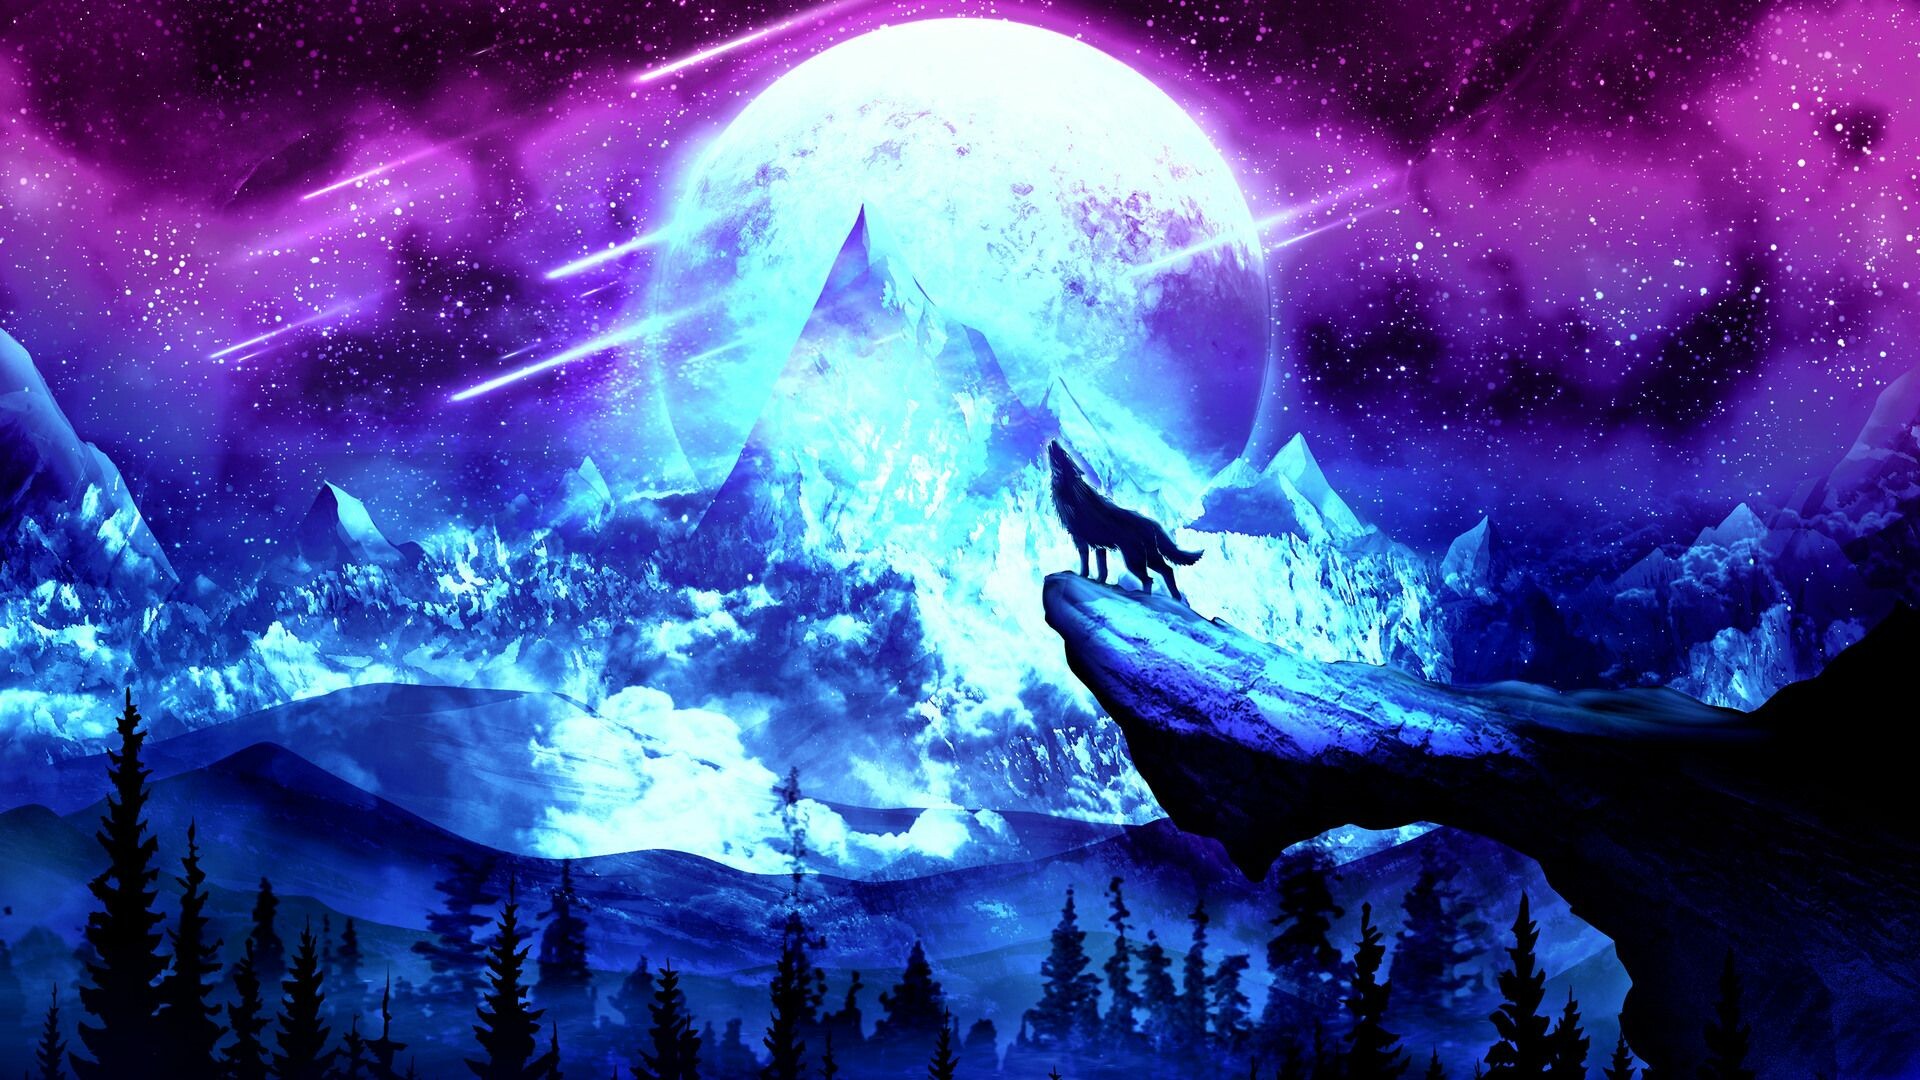 Wolf: The largest members of the dog family, Fantasy art. 1920x1080 Full HD Wallpaper.